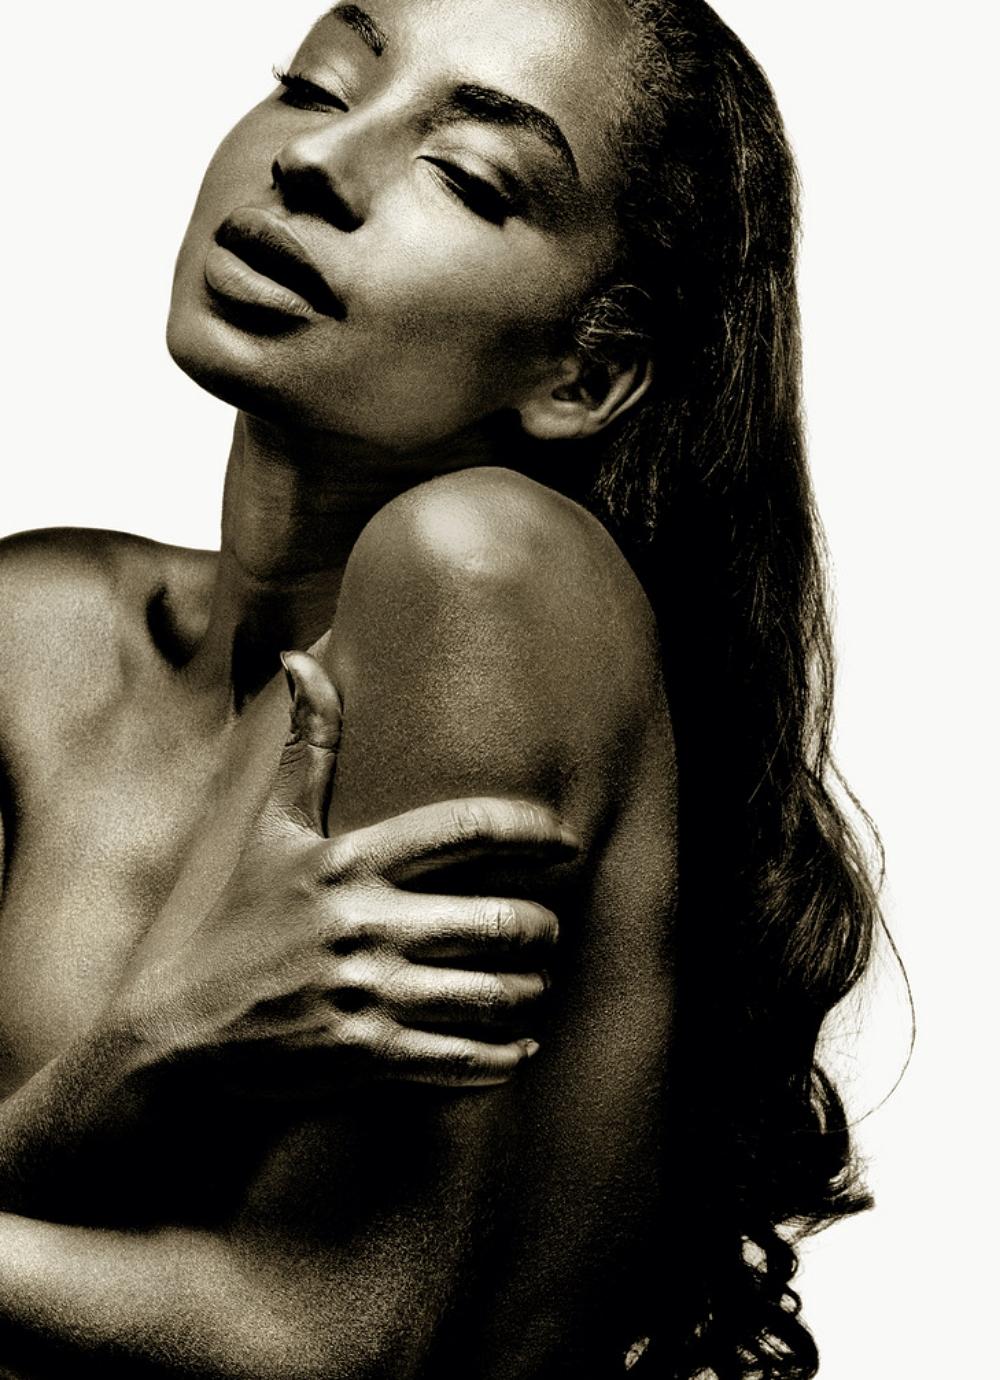 Albert WATSON (*1942, Scotland)
Sade 'Love Deluxe', 1992
Archival pigment print
142 x 107 cm (55 7/8 x 42 1/8 in.)
Edition of 10, plus 2 AP
Print only

Drake purchased a series of Albert's prints, including iconic portraits of Sade, Prince, Snoop